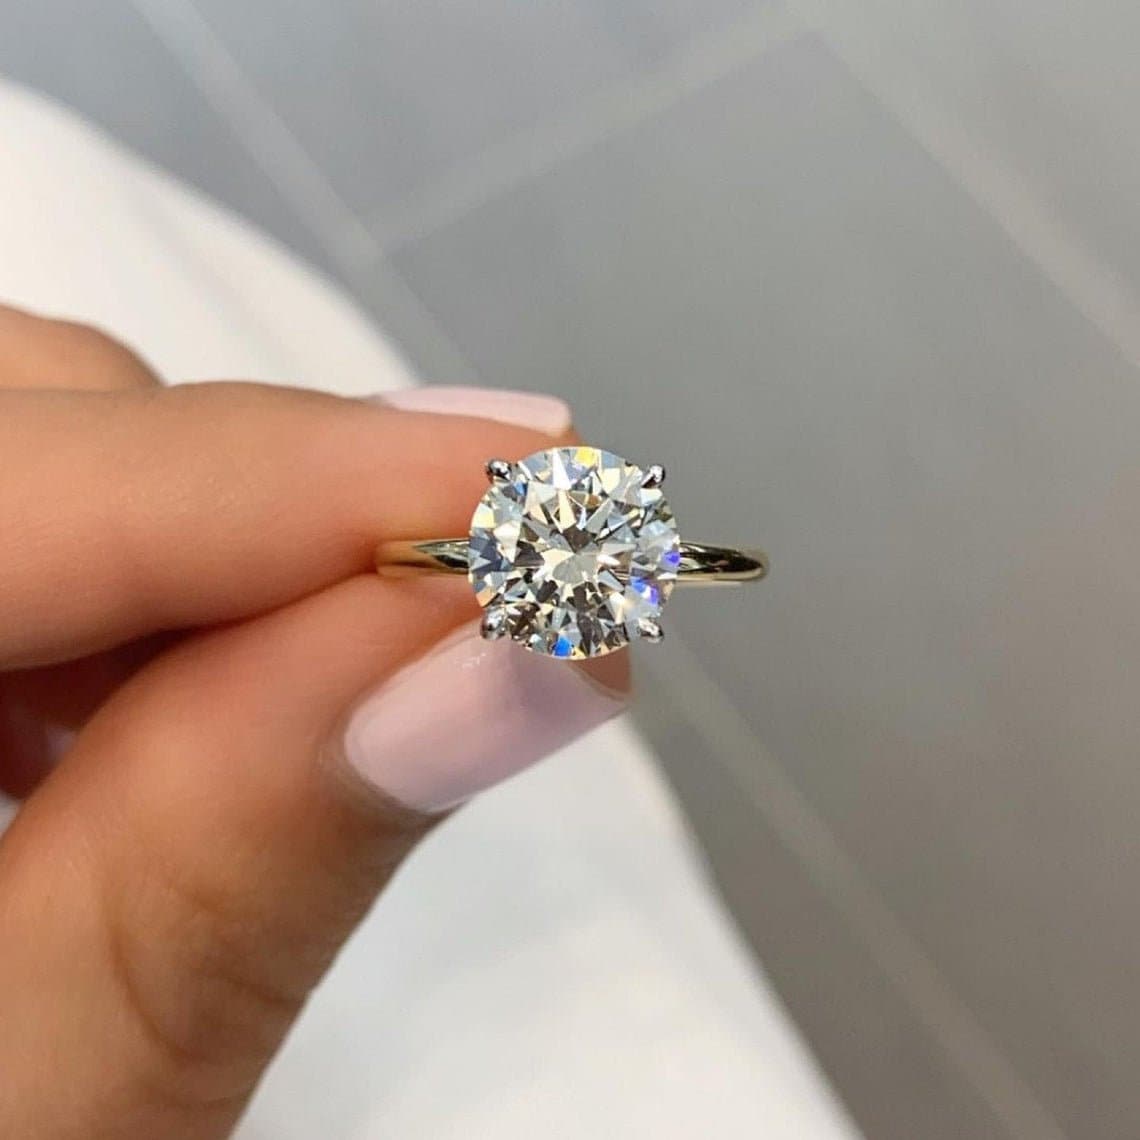 Ultimate Guide to Buying a $4000 Engagement Ring (+ My Ring Review)